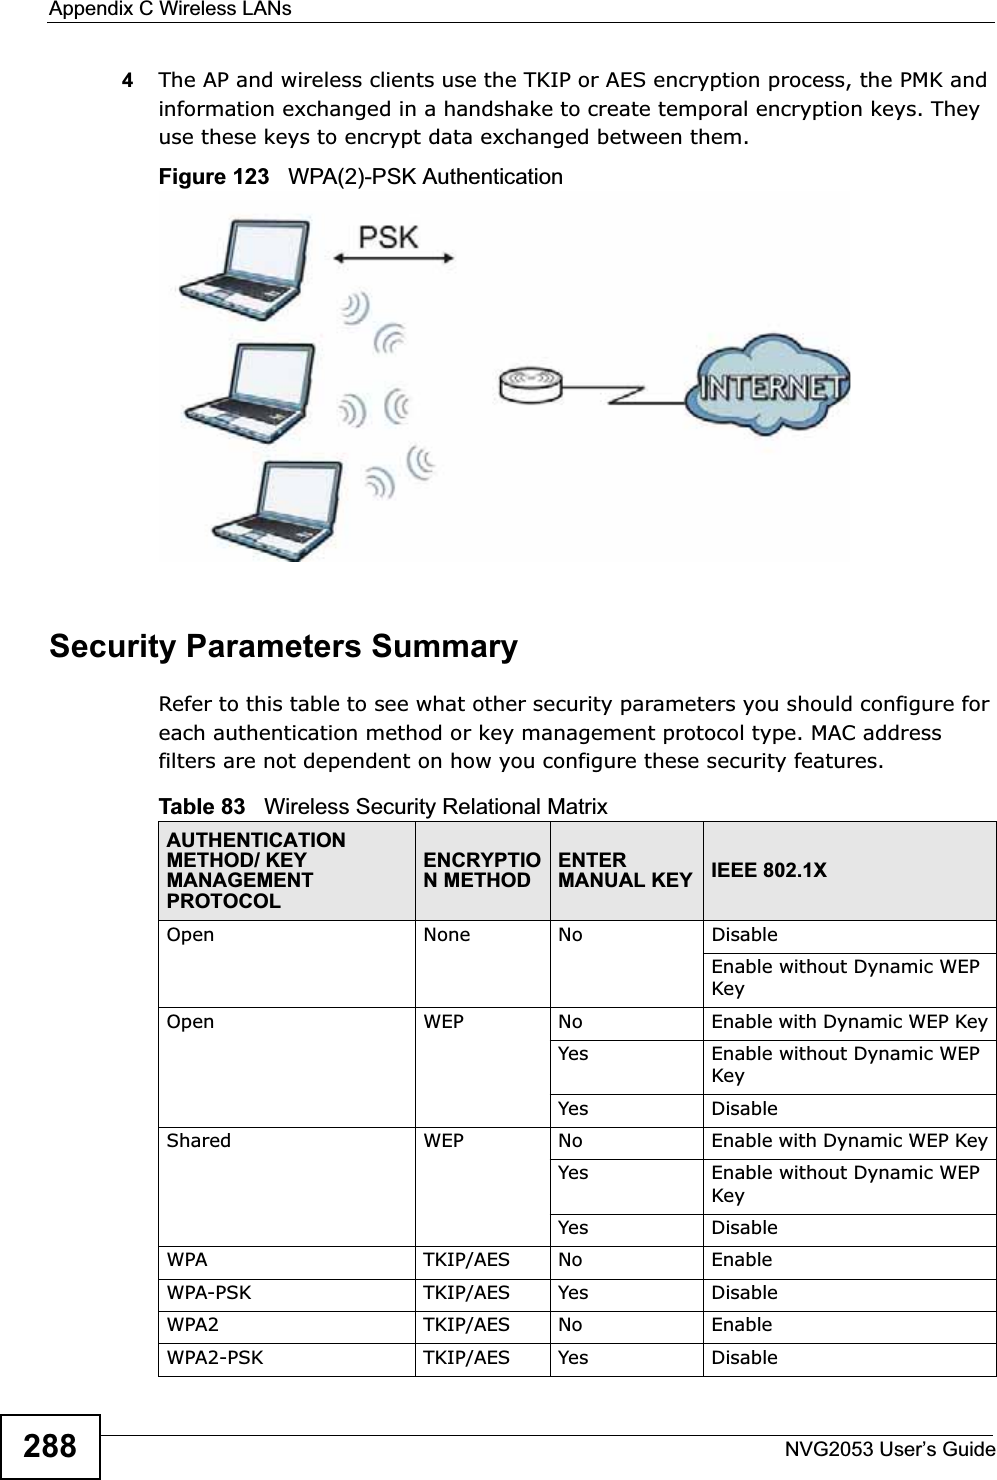 Appendix C Wireless LANsNVG2053 User’s Guide2884The AP and wireless clients use the TKIP or AES encryption process, the PMK and information exchanged in a handshake to create temporal encryption keys. They use these keys to encrypt data exchanged between them.Figure 123   WPA(2)-PSK AuthenticationSecurity Parameters SummaryRefer to this table to see what other security parameters you should configure for each authentication method or key management protocol type. MAC address filters are not dependent on how you configure these security features.Table 83   Wireless Security Relational MatrixAUTHENTICATIONMETHOD/ KEY MANAGEMENTPROTOCOLENCRYPTION METHODENTERMANUAL KEY IEEE 802.1XOpen None No DisableEnable without Dynamic WEP KeyOpen WEP No           Enable with Dynamic WEP KeyYes Enable without Dynamic WEP KeyYes DisableShared WEP  No           Enable with Dynamic WEP KeyYes Enable without Dynamic WEP KeyYes DisableWPA  TKIP/AES No EnableWPA-PSK  TKIP/AES Yes DisableWPA2 TKIP/AES No EnableWPA2-PSK  TKIP/AES Yes Disable